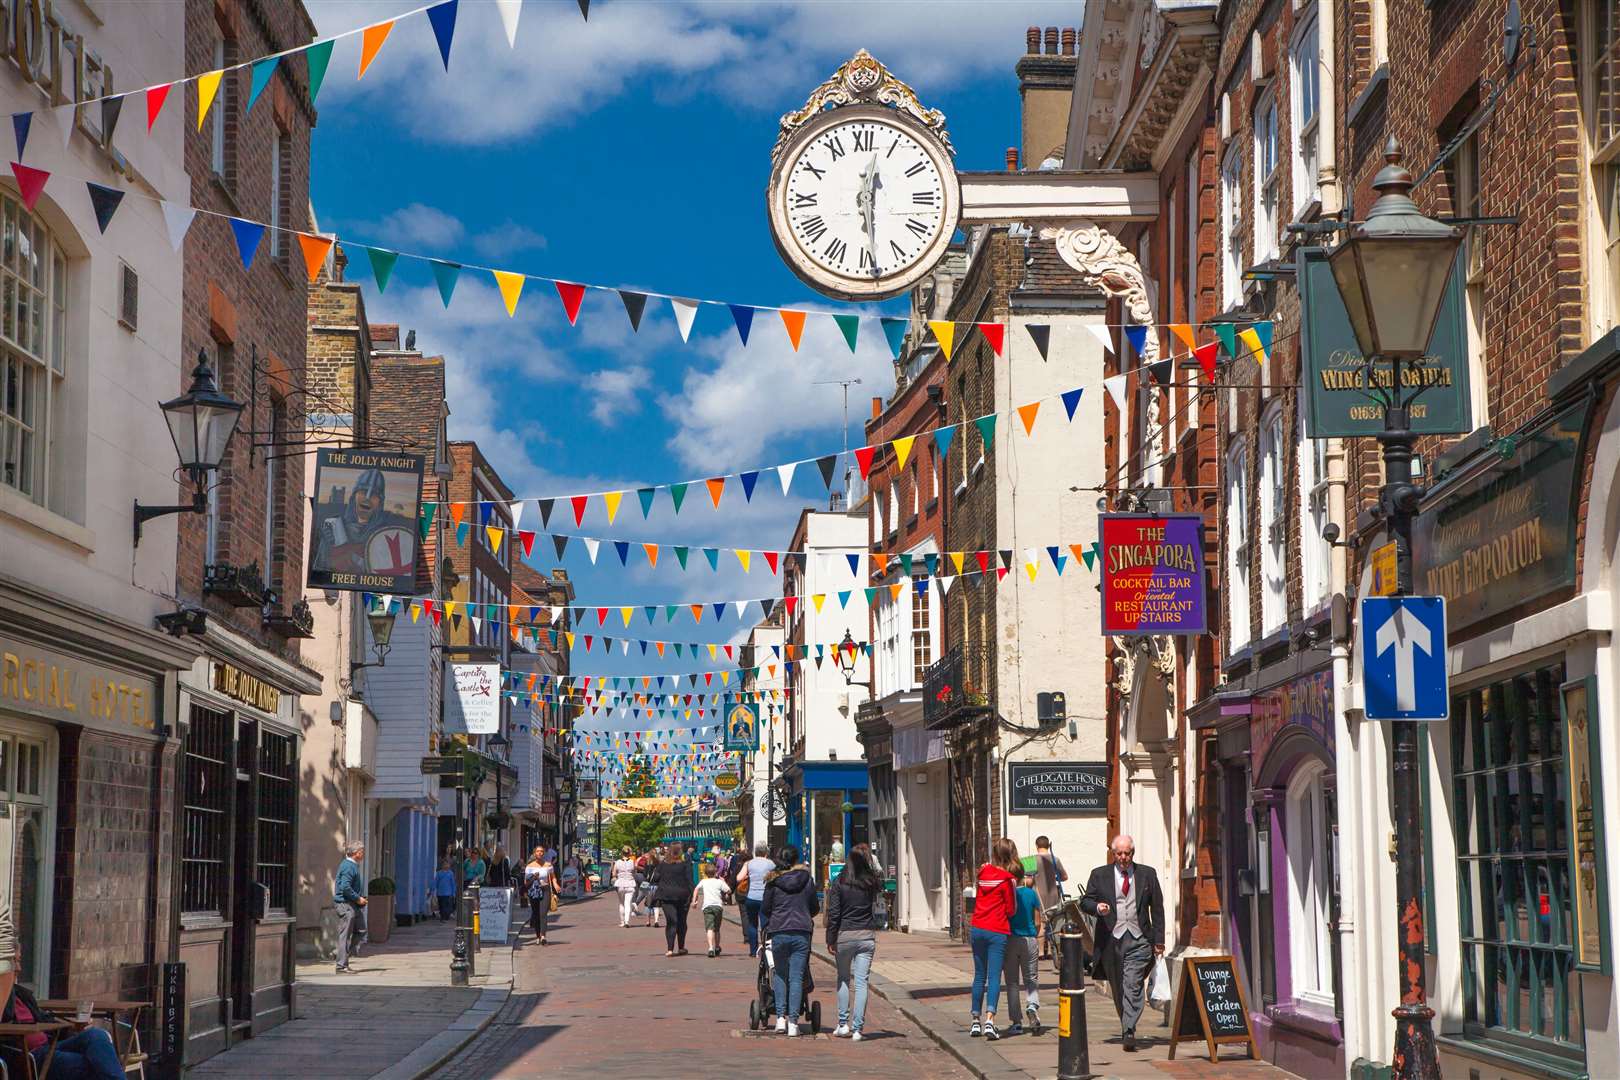 Rochester has the fastest selling houses in England and Wales according to new data out today